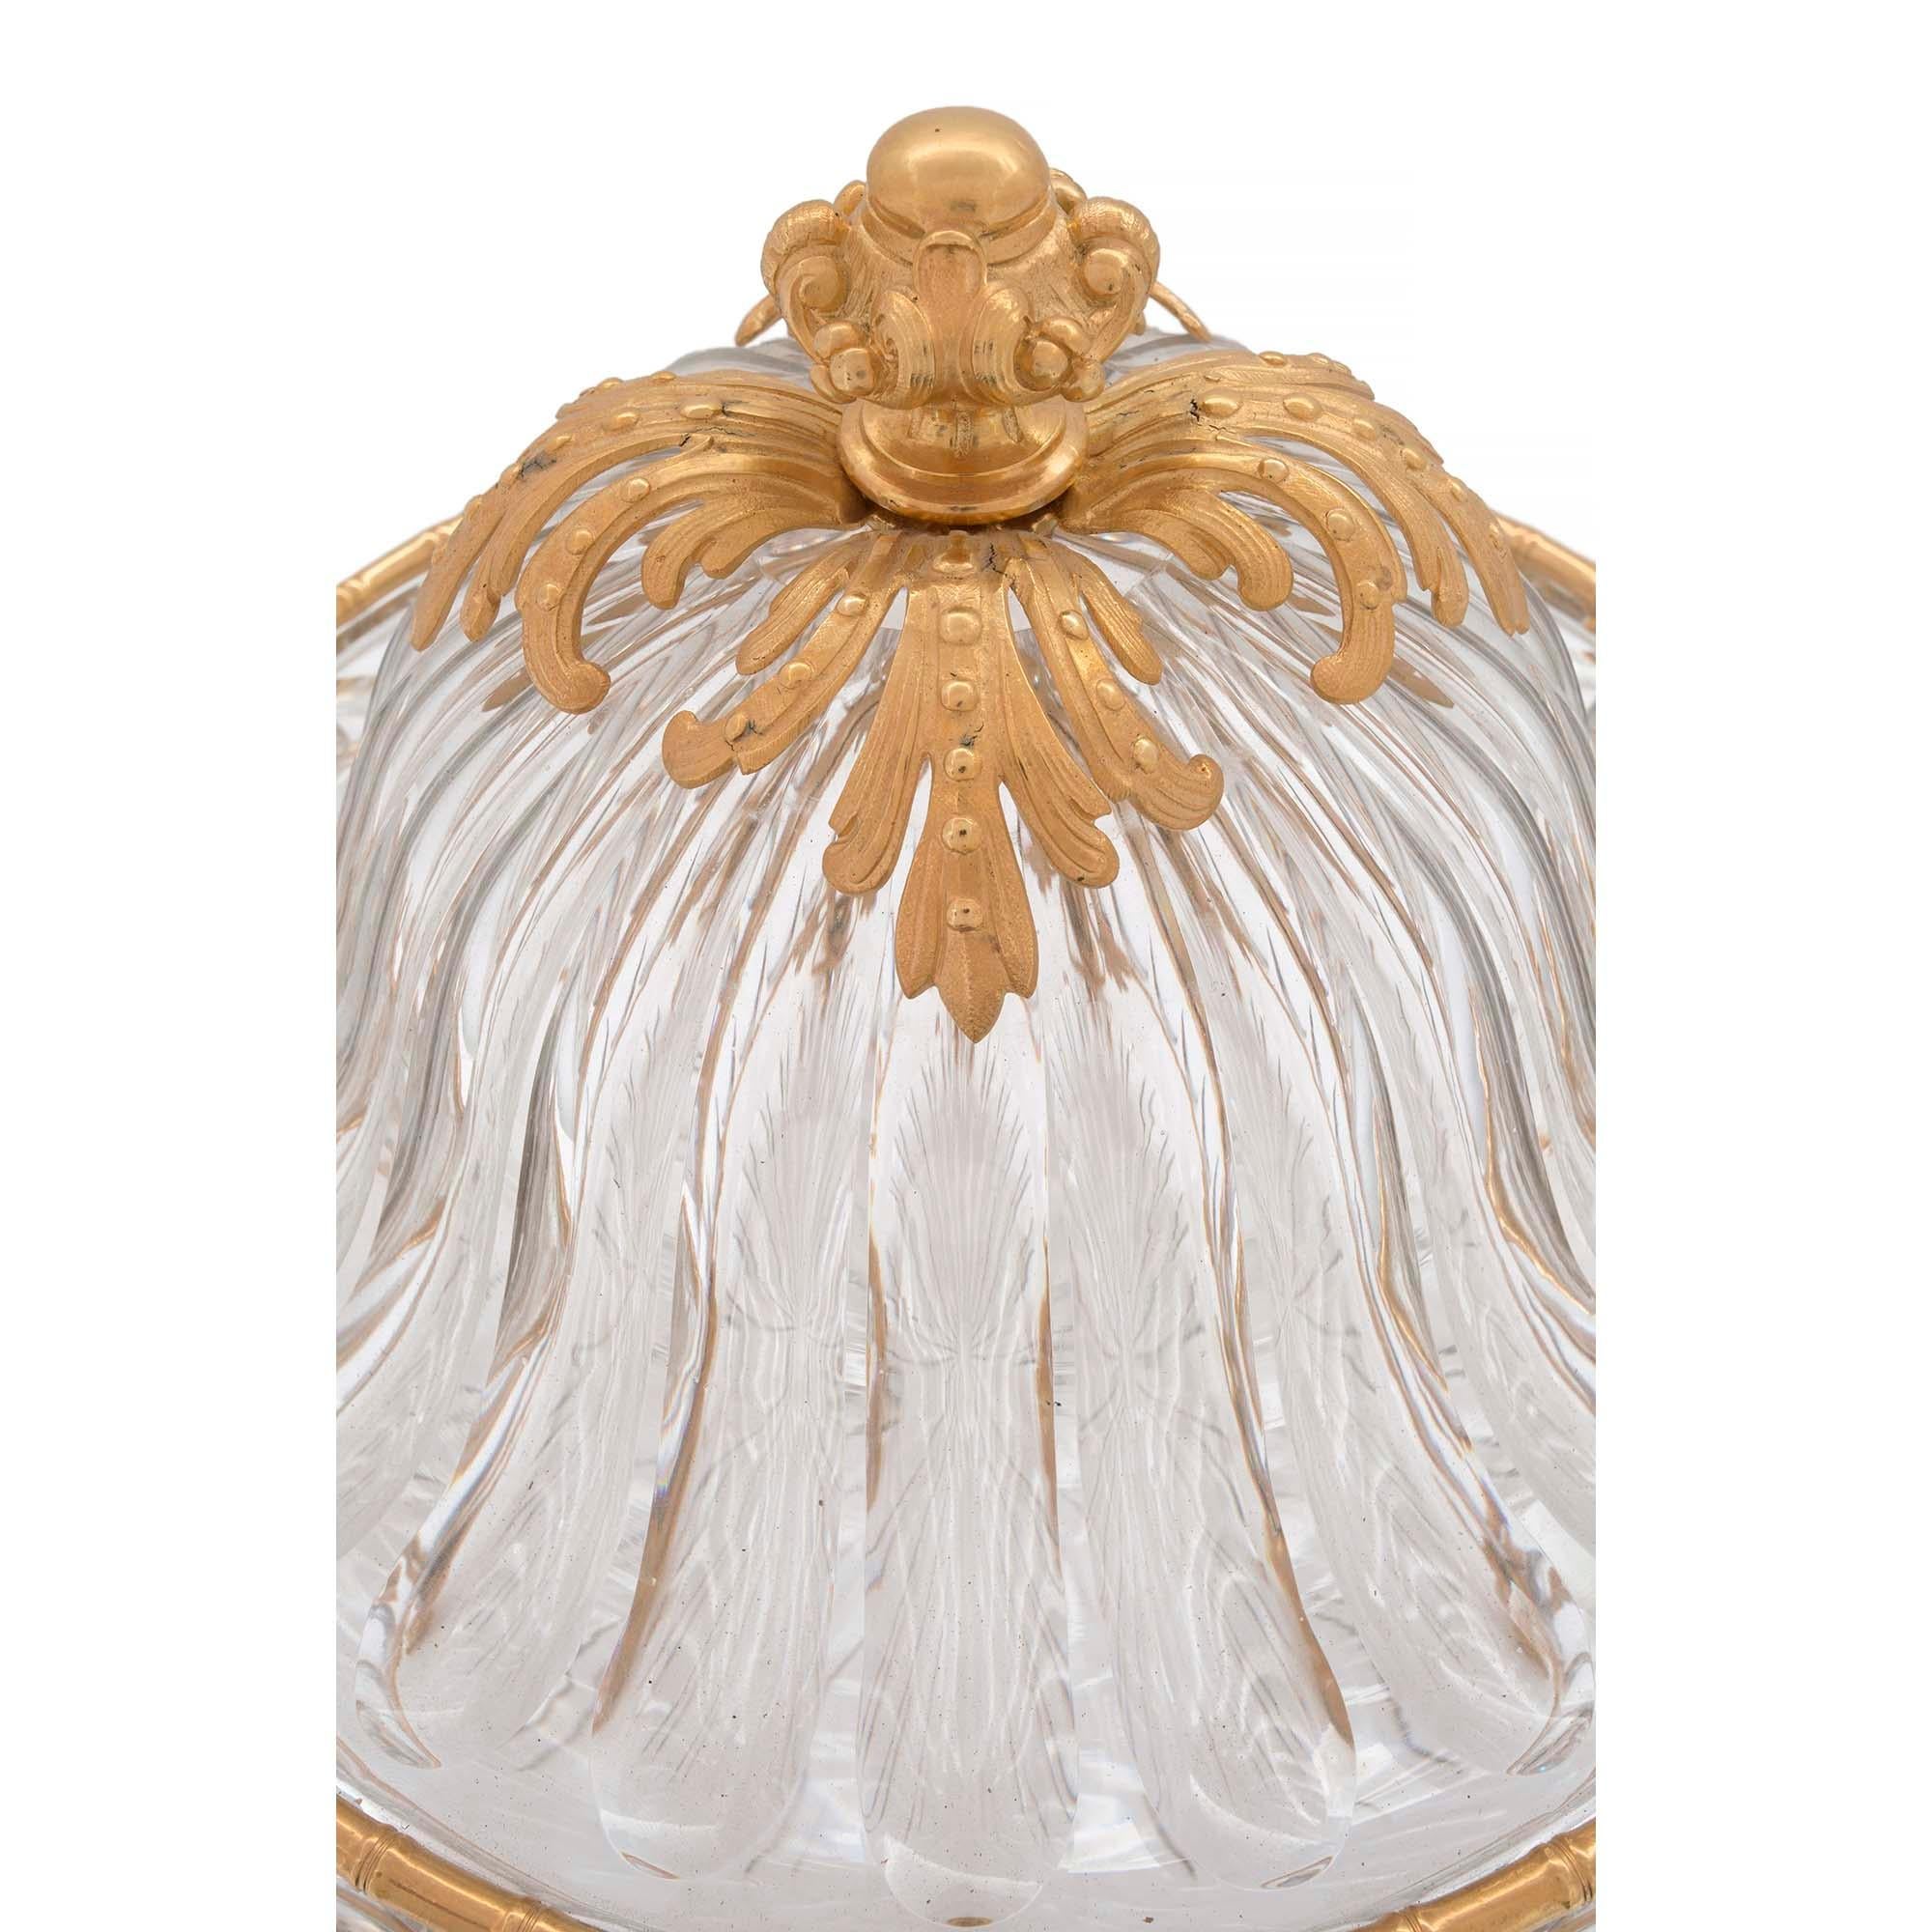 French Mid-19th Century Louis XVI Style Baccarat Crystal and Ormolu Coffret For Sale 2